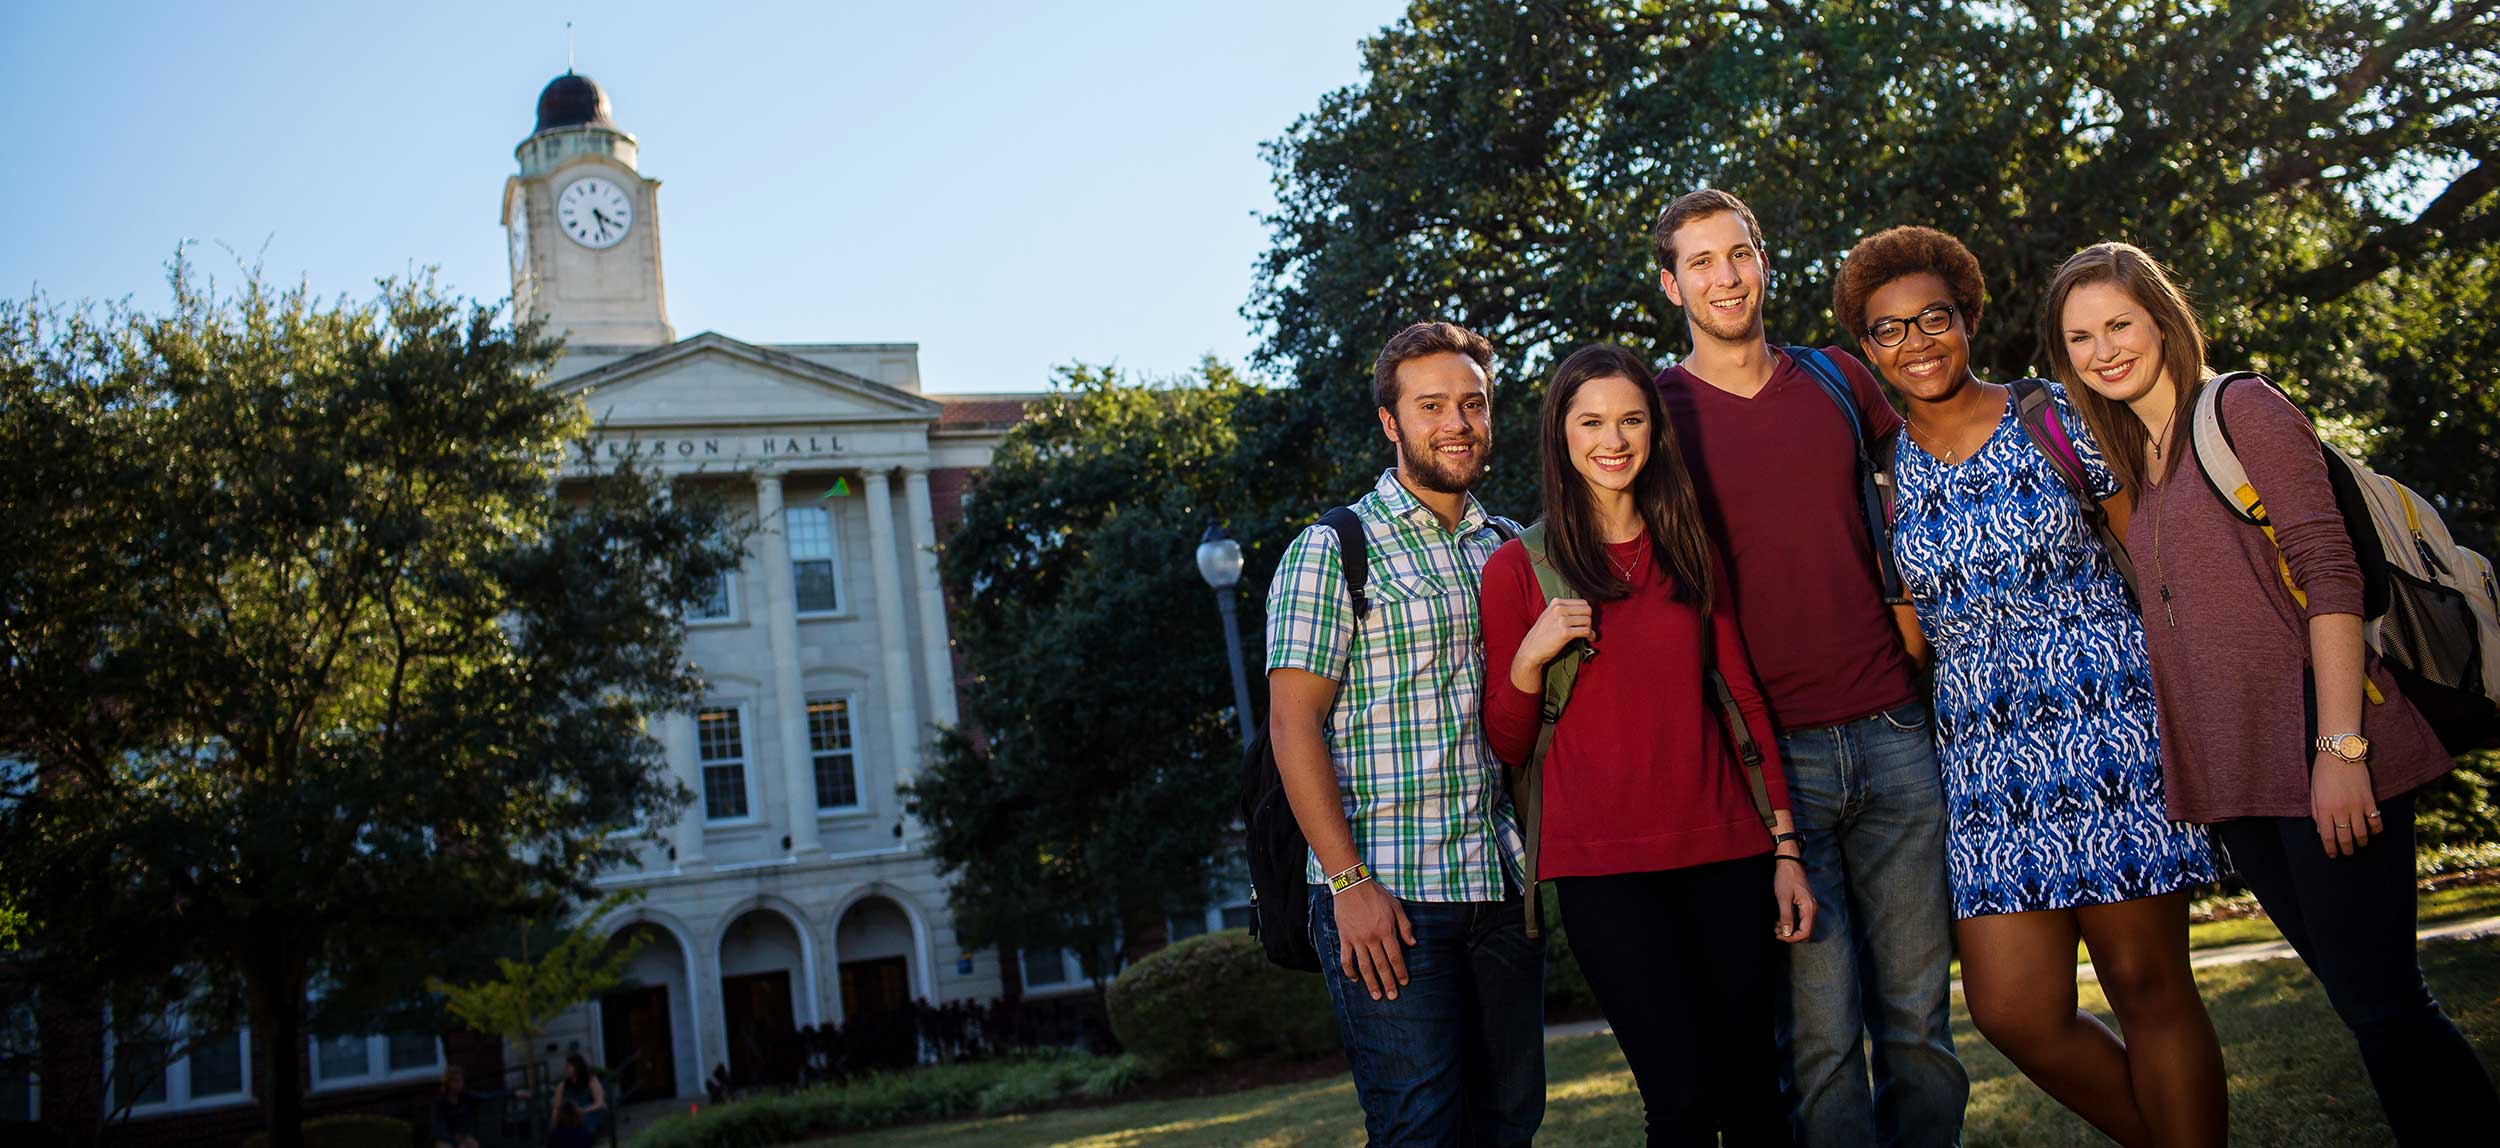 Five students posing for a photo on the Quad in front of Nelson Hall on Mississippi College's campus.